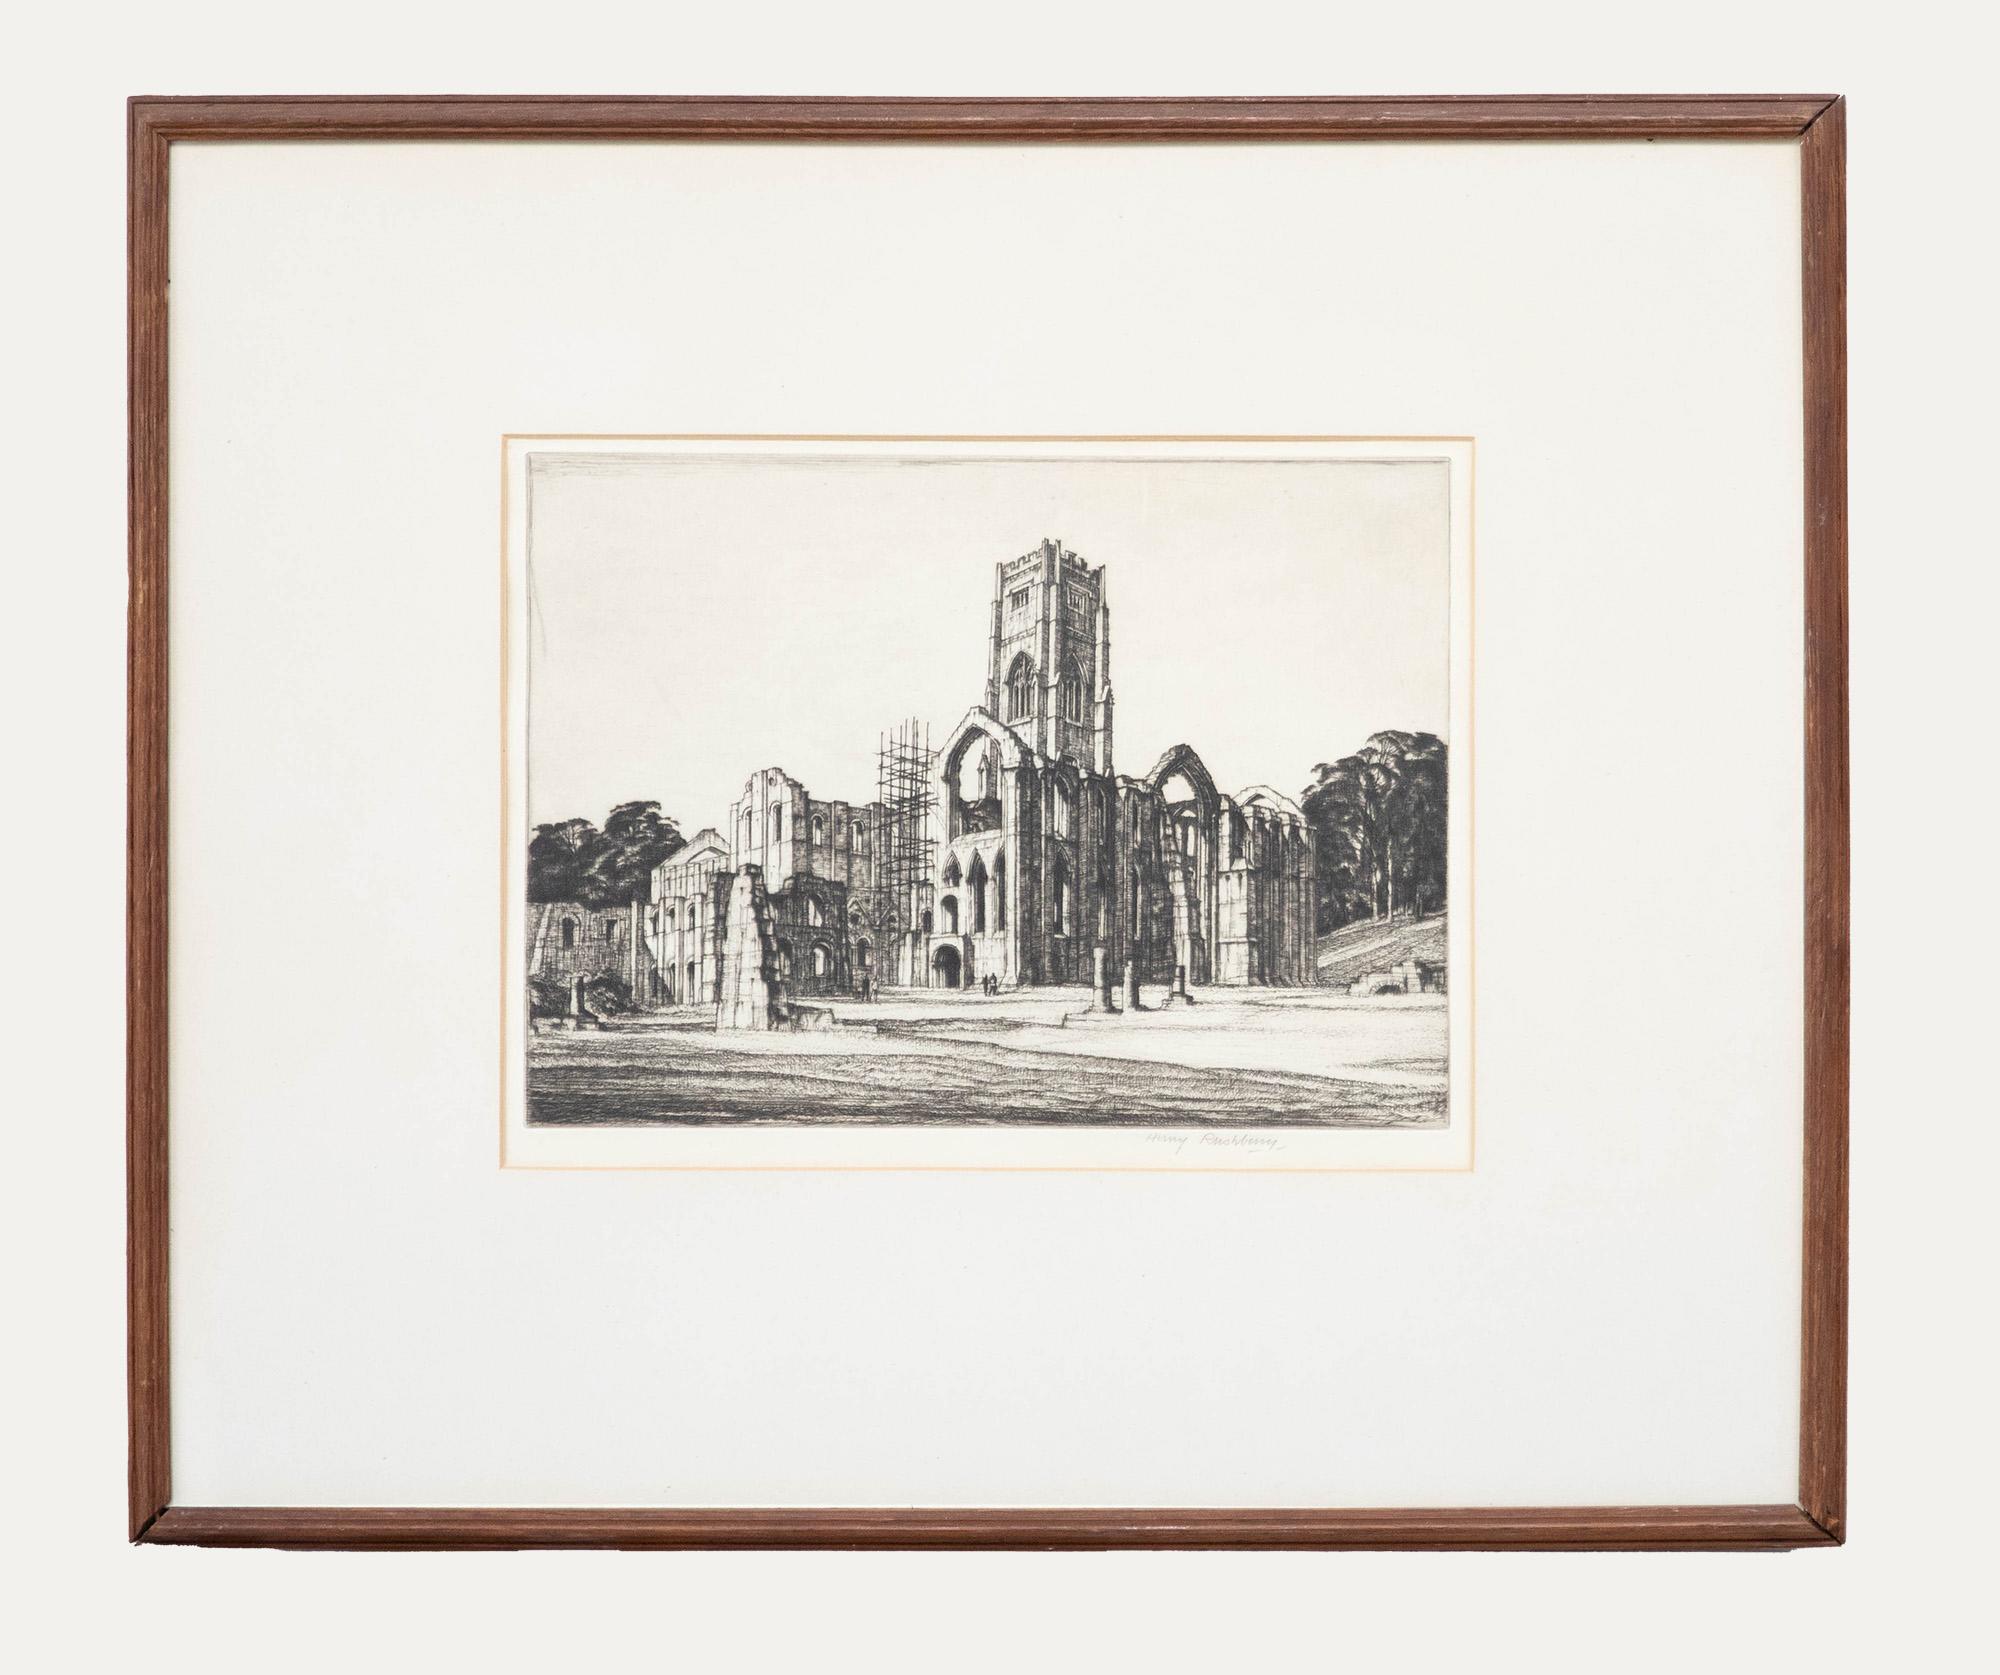 Henry Rushbury Landscape Print - Sir Henry George Rushbury (1889-1968) - Framed Drypoint, Fountains Abbey